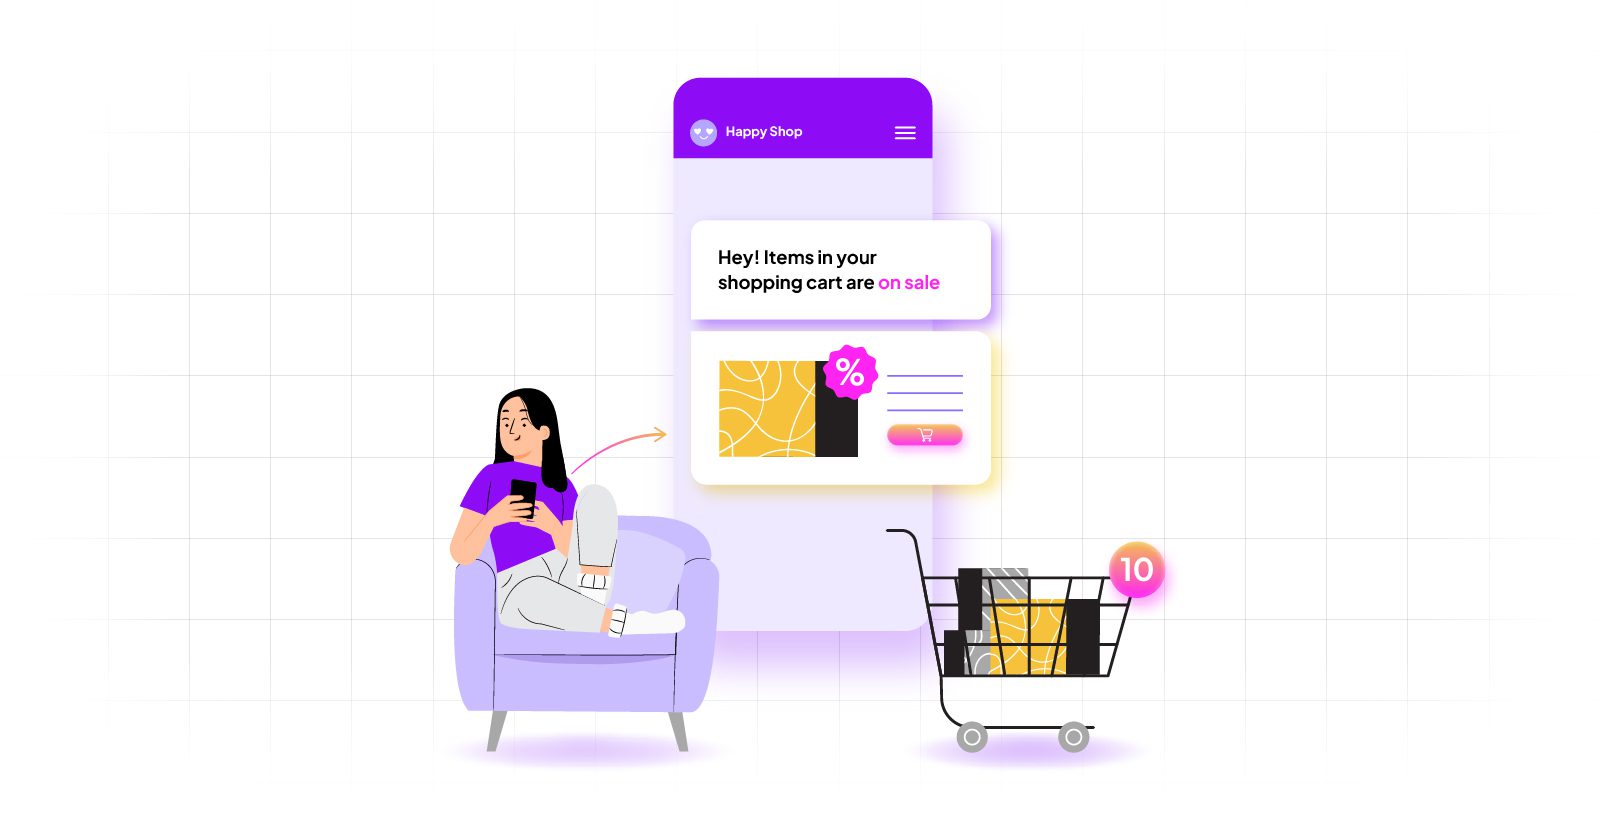 Send messages to your customers about products they've added to their cart.